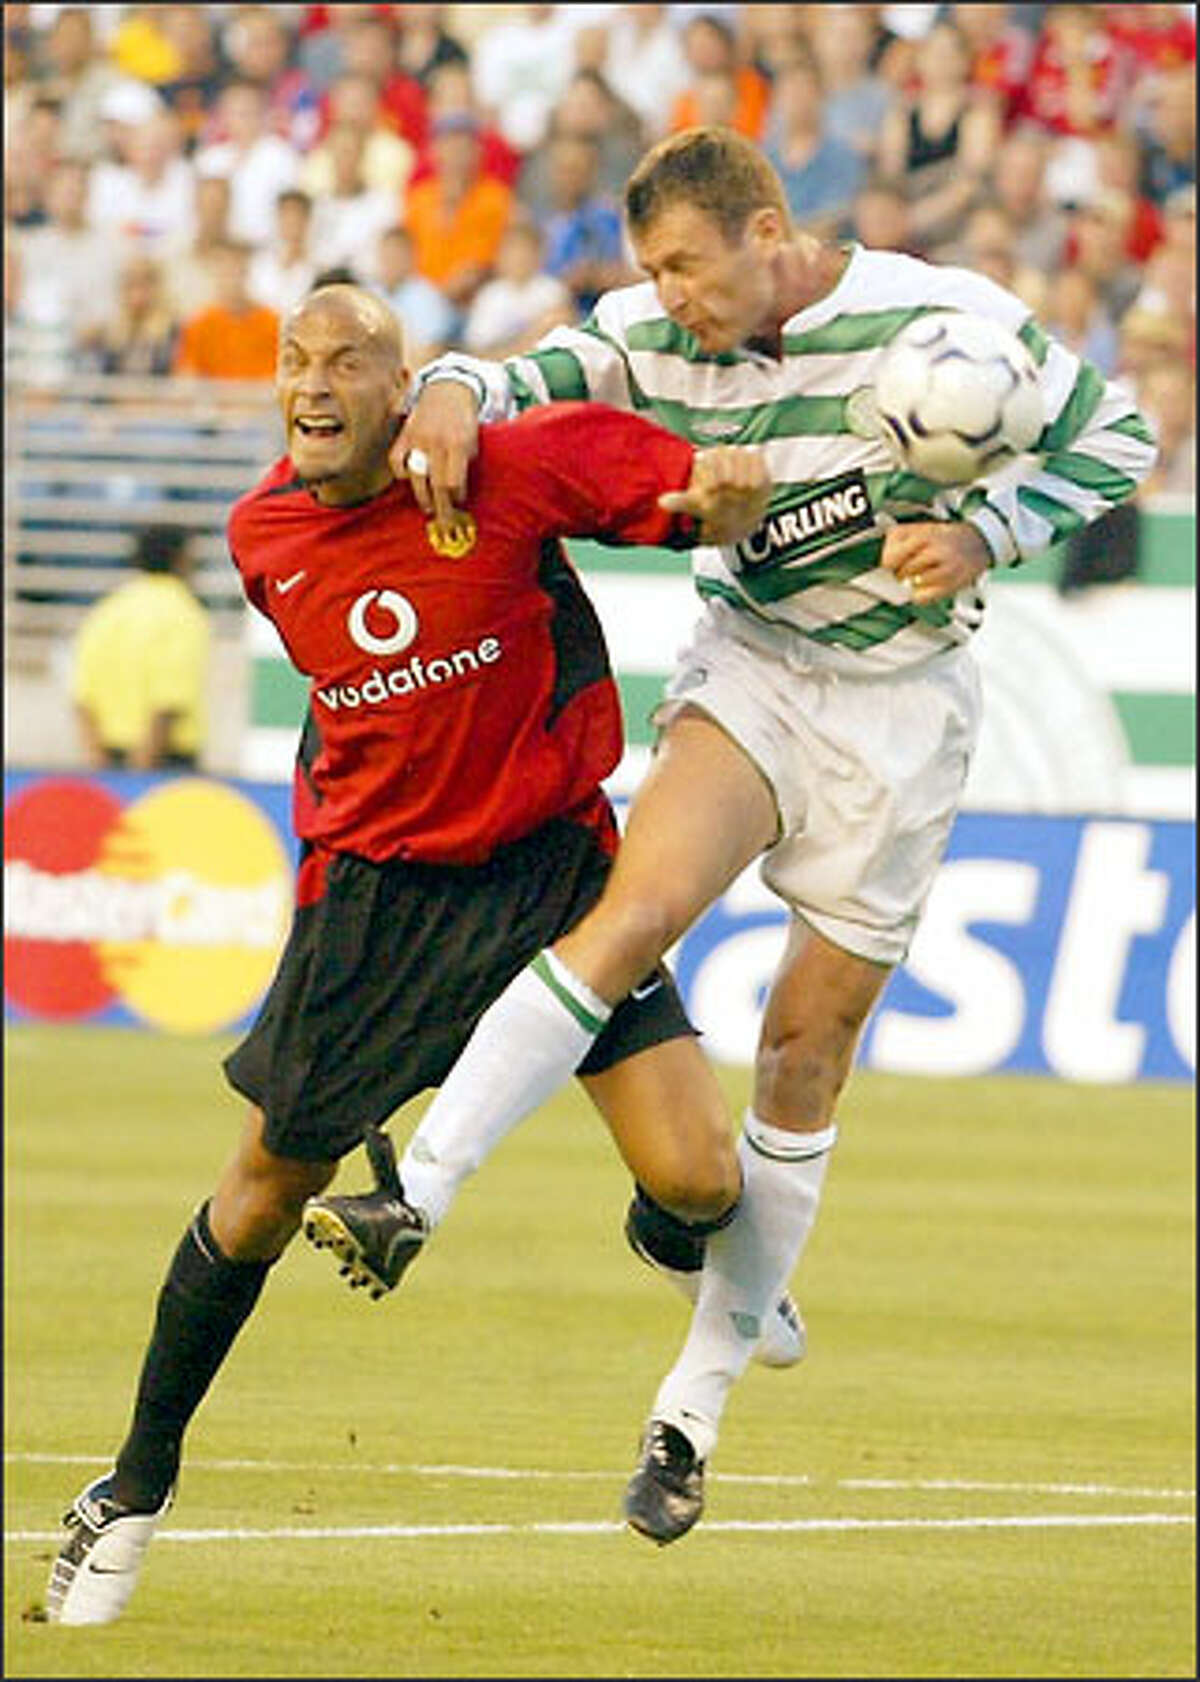 Manchester United's Rio Ferdinand, left, and Celtic's Chris Sutton battle for the ball during the first half.